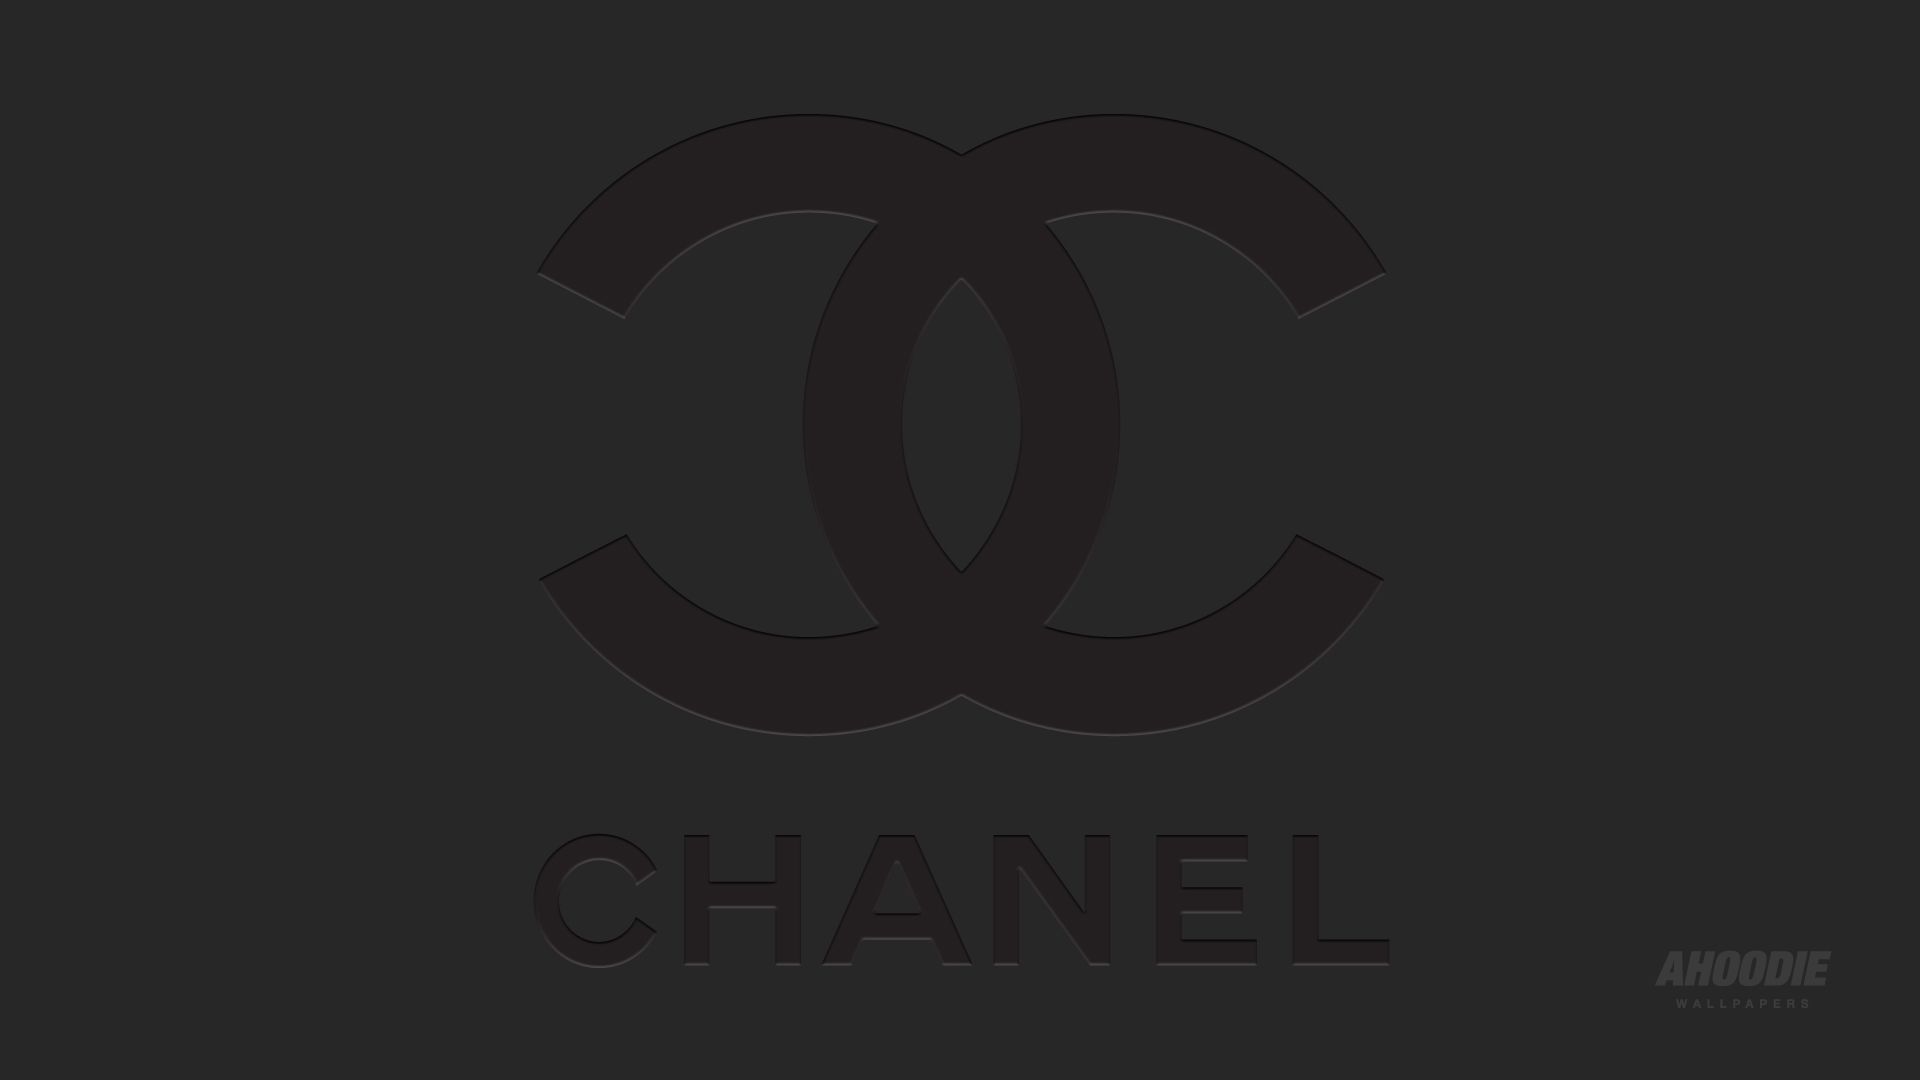 Chanel Wallpapers AHOODIE - Brand wallpapers